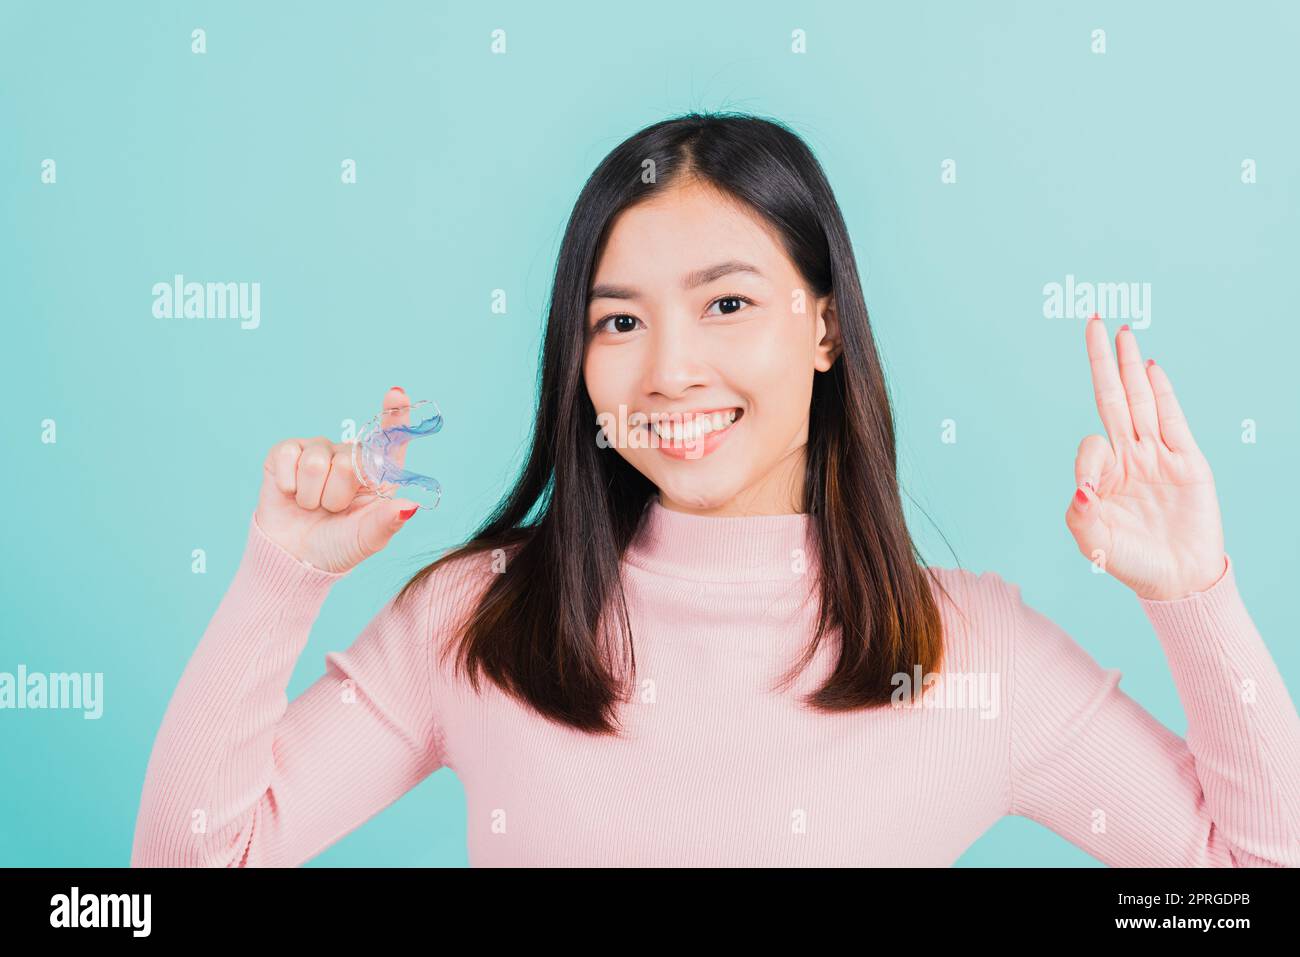 woman smiling holding silicone orthodontic retainers for teeth and show finger brackets saying OK sign Stock Photo